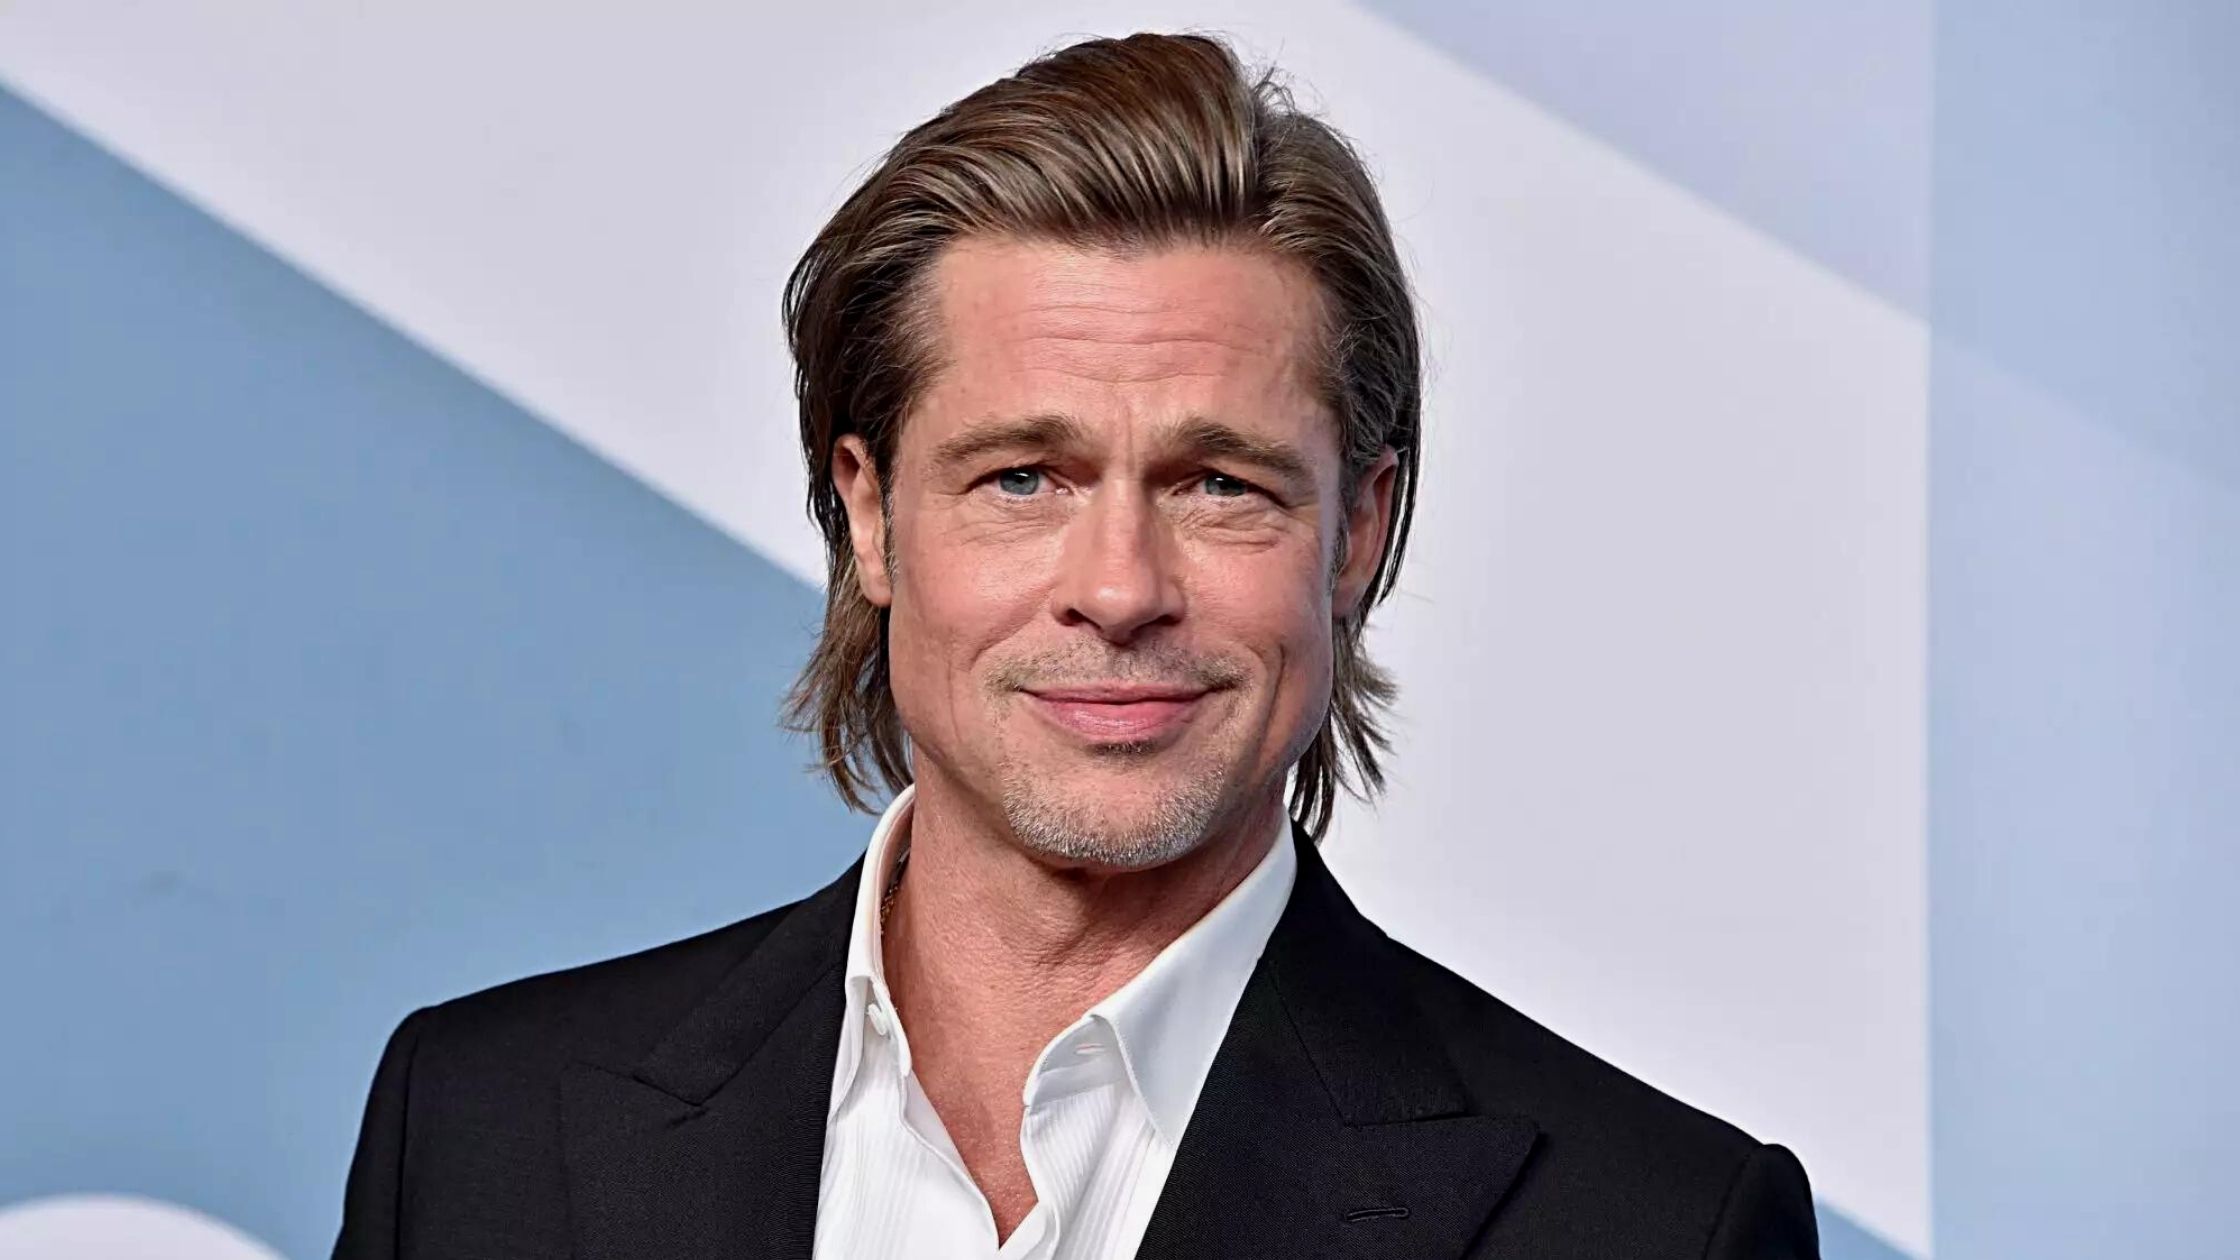 Brad Pitt Says He Suffers From 'Face Blindness' Which 'No One Believes